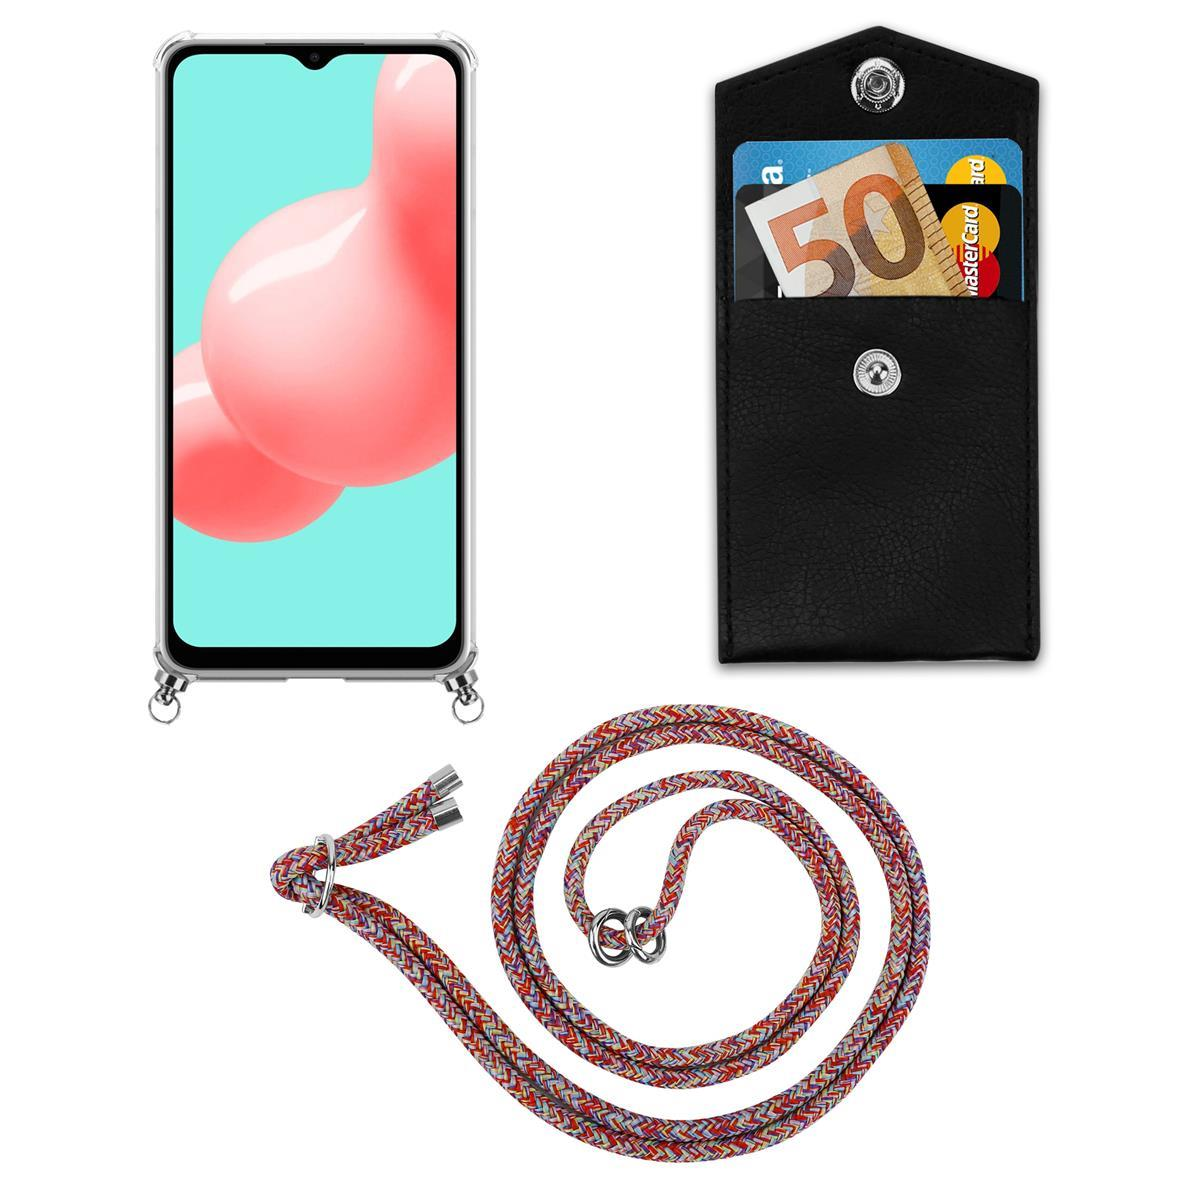 Kordel A32 Band COLORFUL Samsung, CADORABO Kette Galaxy Handy Backcover, Hülle, Ringen, PARROT 5G, abnehmbarer mit und Silber